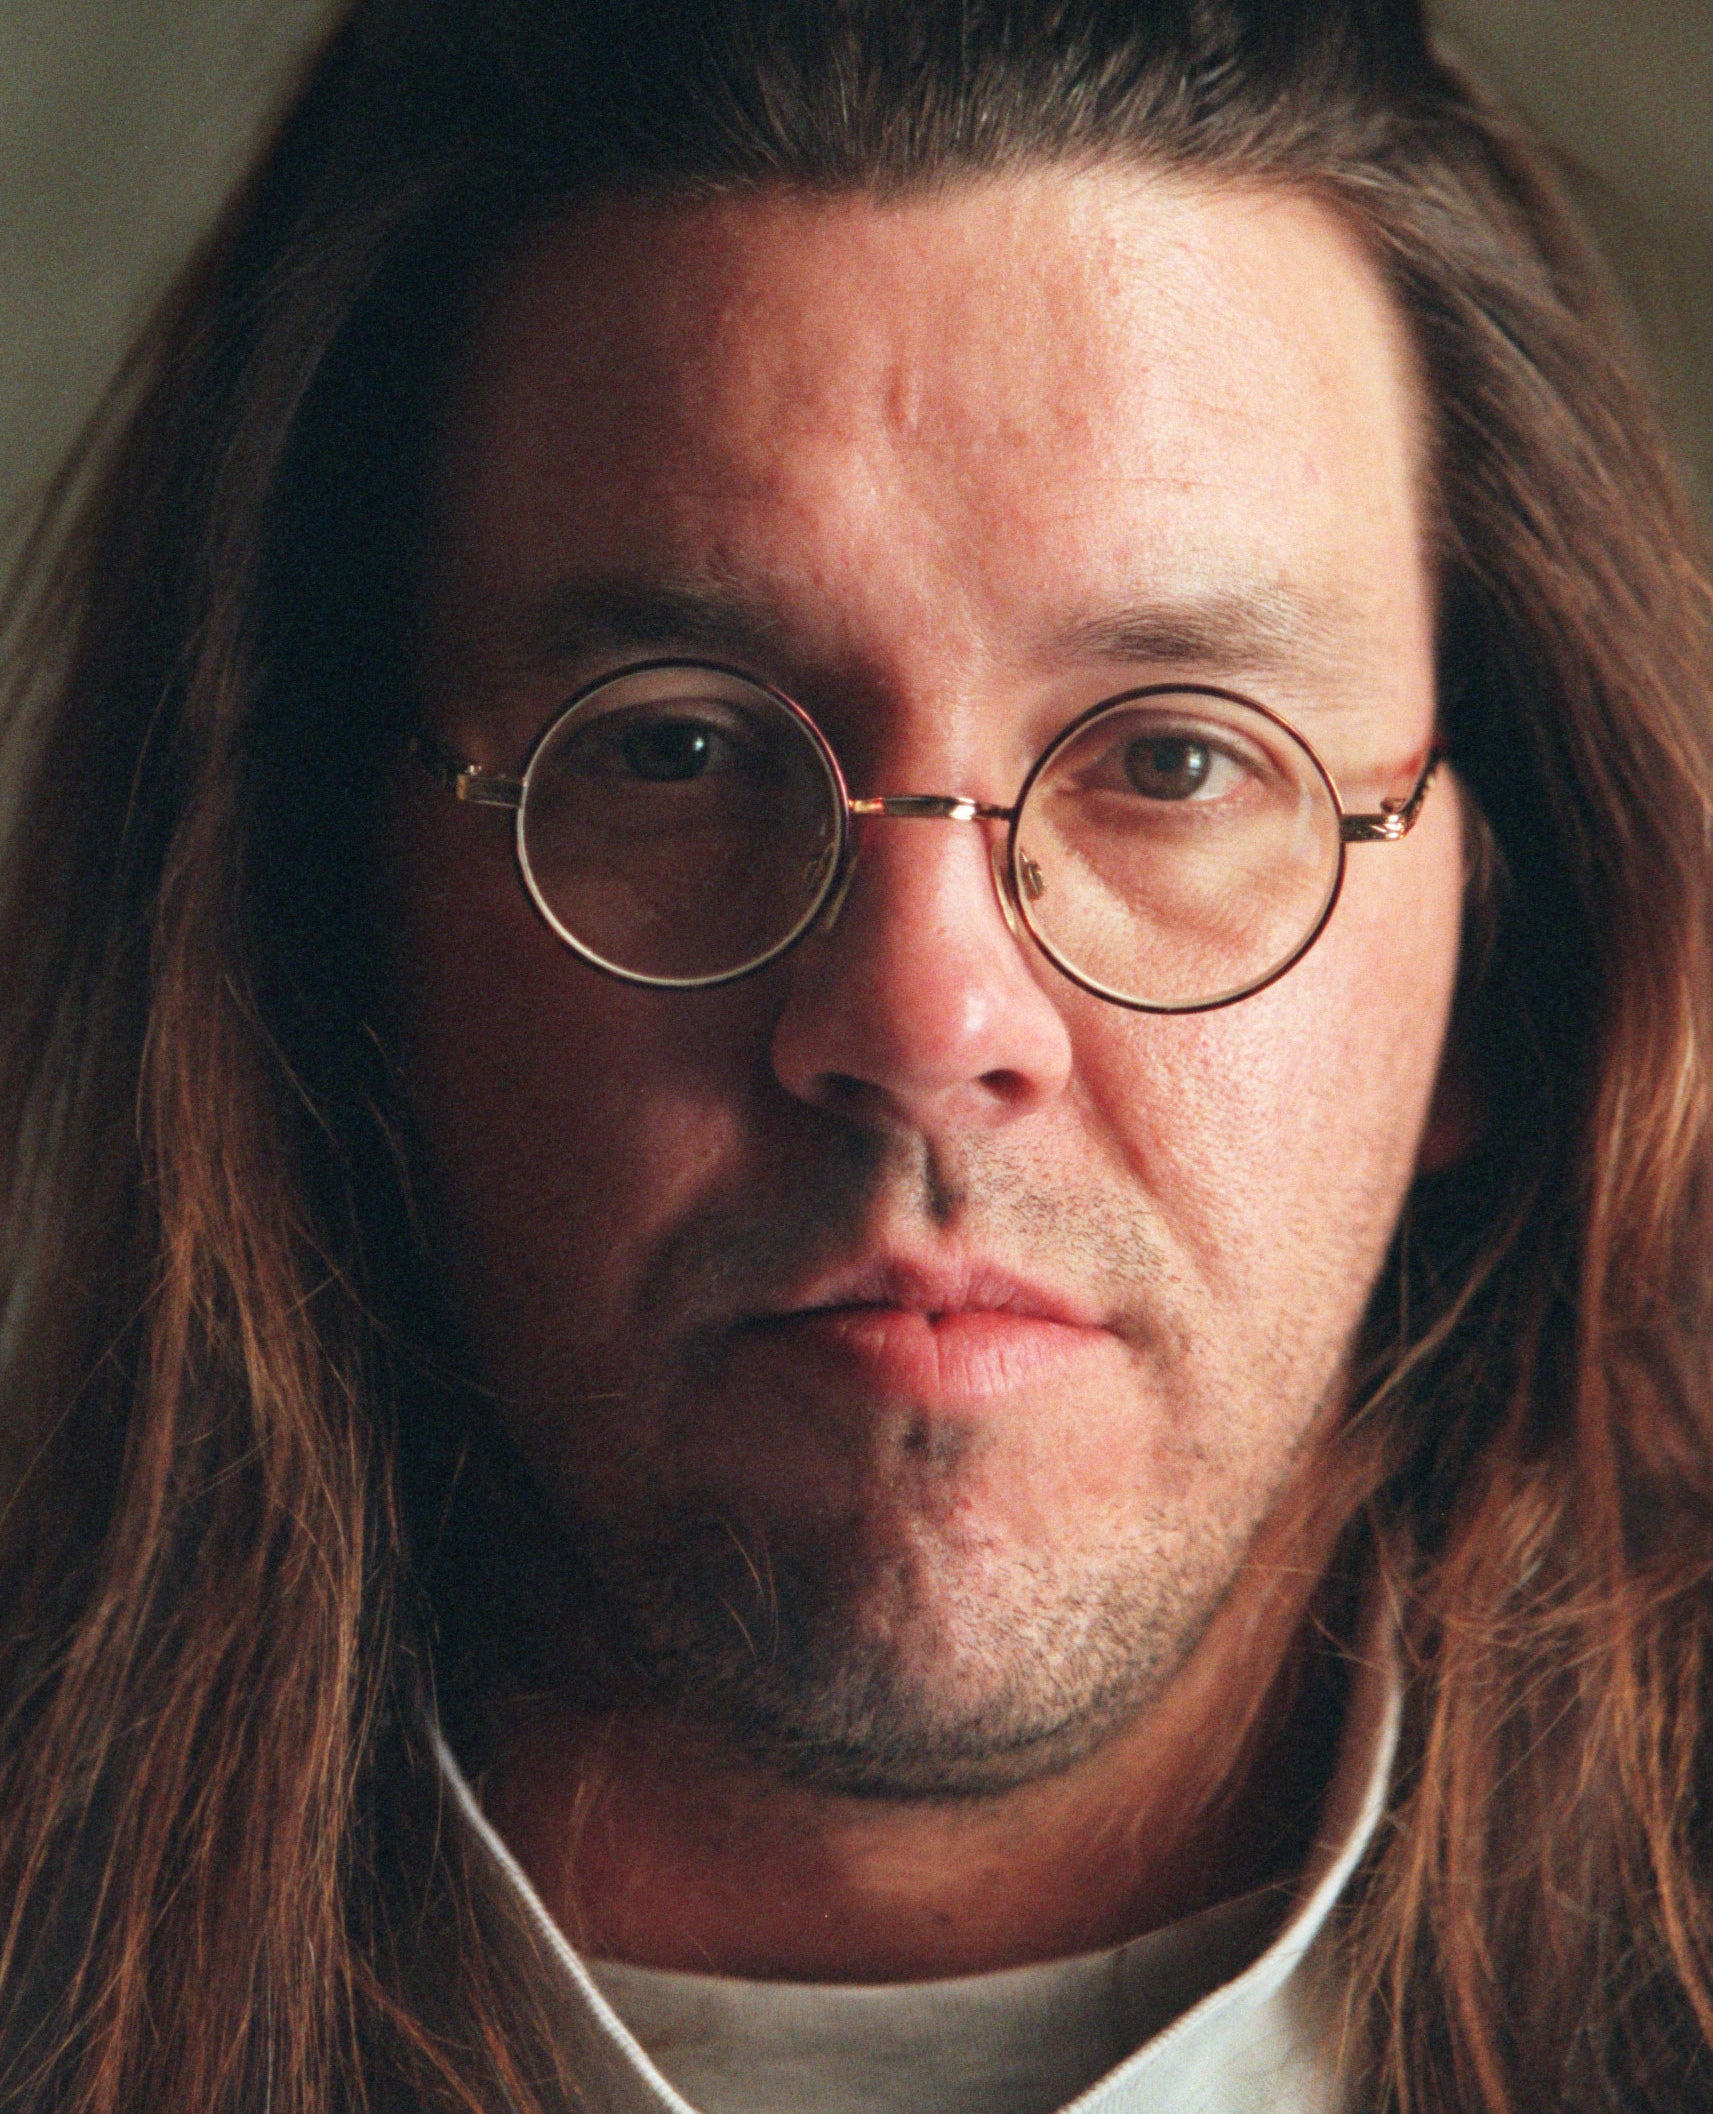 A close up picture of David Foster Wallace, author of Infinite Jest